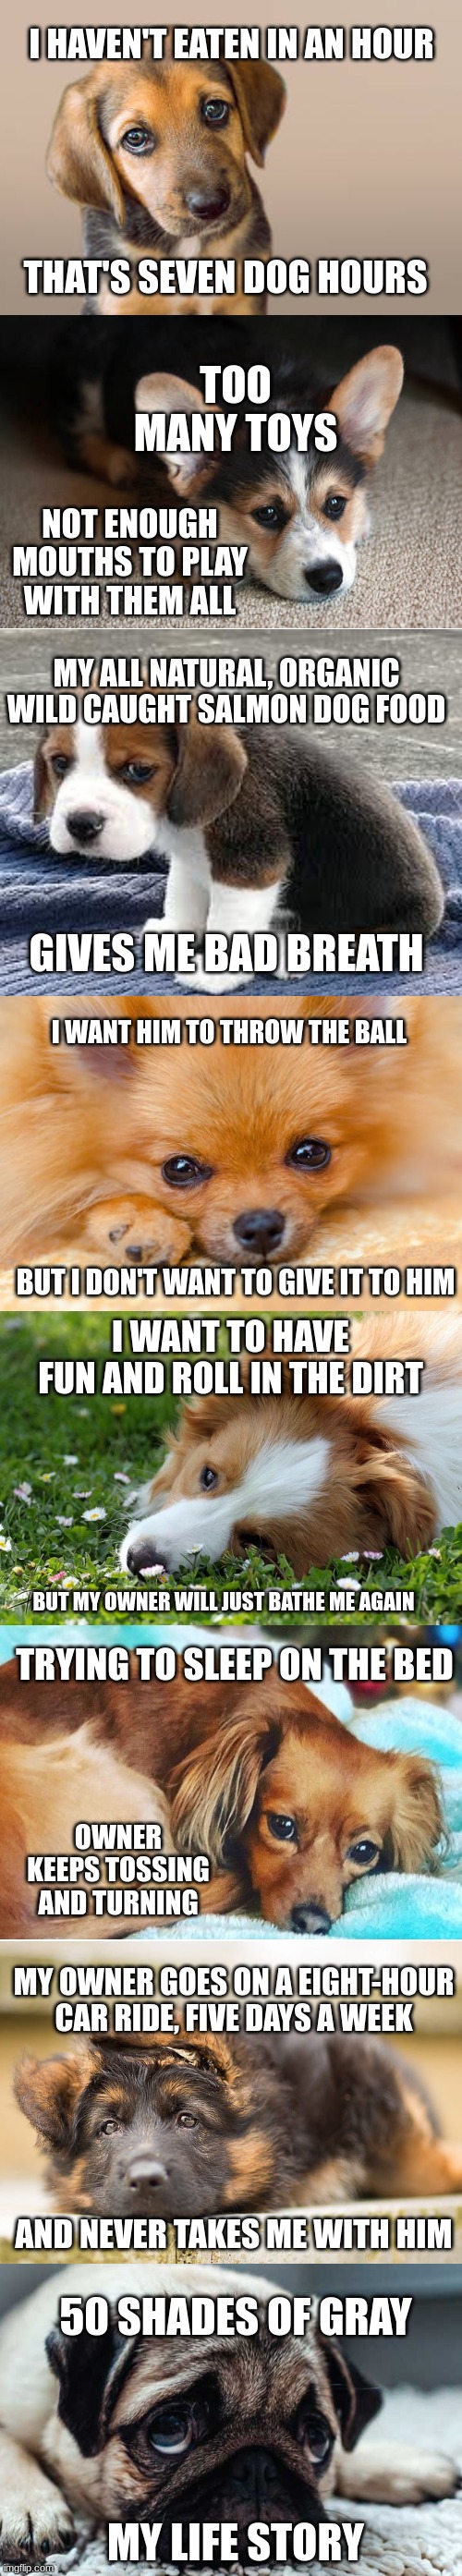 A Dog's Life Story | image tagged in dogs,dog | made w/ Imgflip meme maker